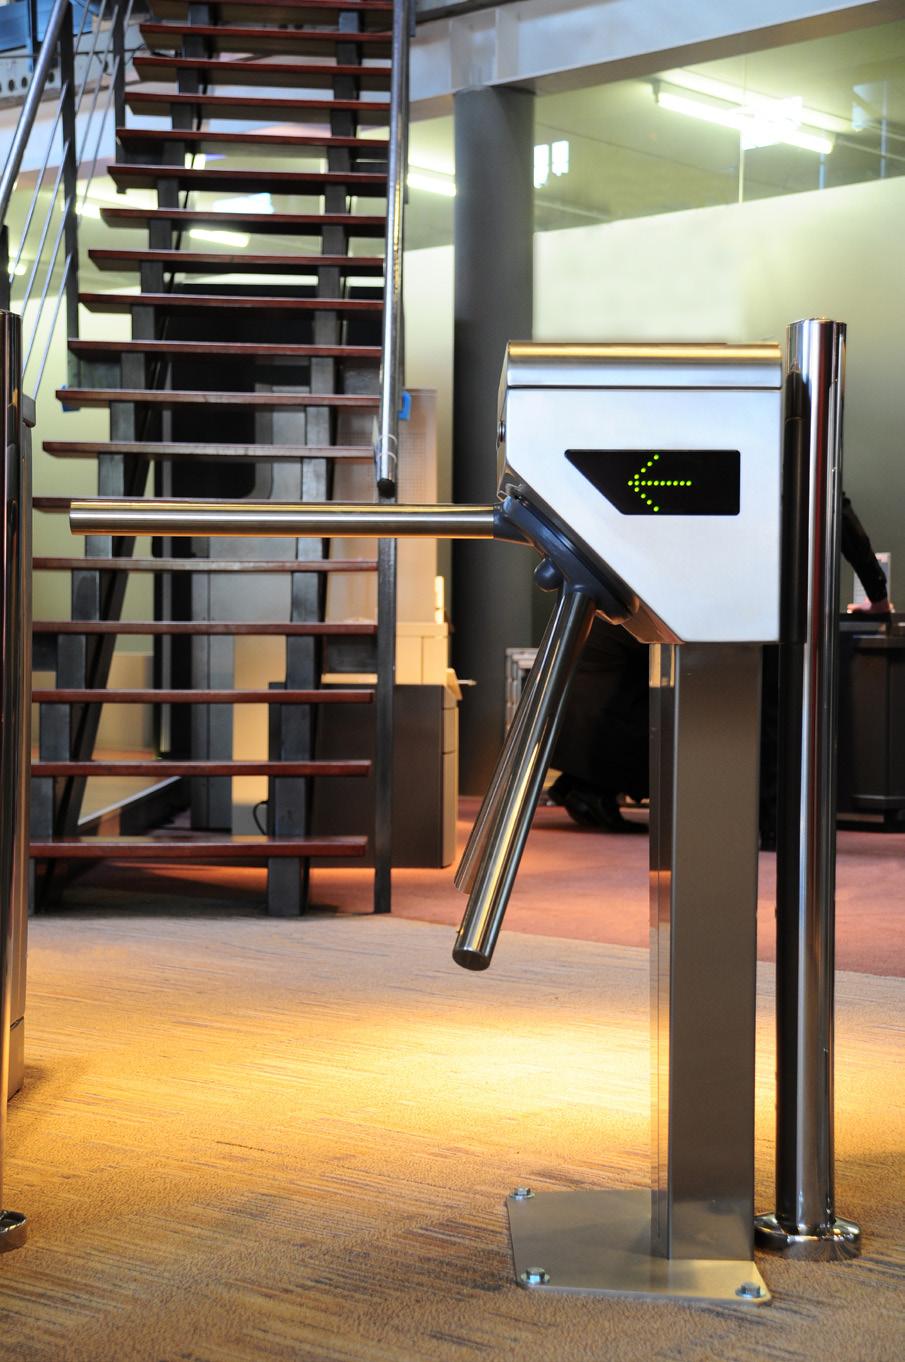 Tripod Turnstile for Internal Installation (*) Tripod Turnstiles are compact and cost-effective entrance solutions designed for smooth and silent operation, less wear and tear and reduced power